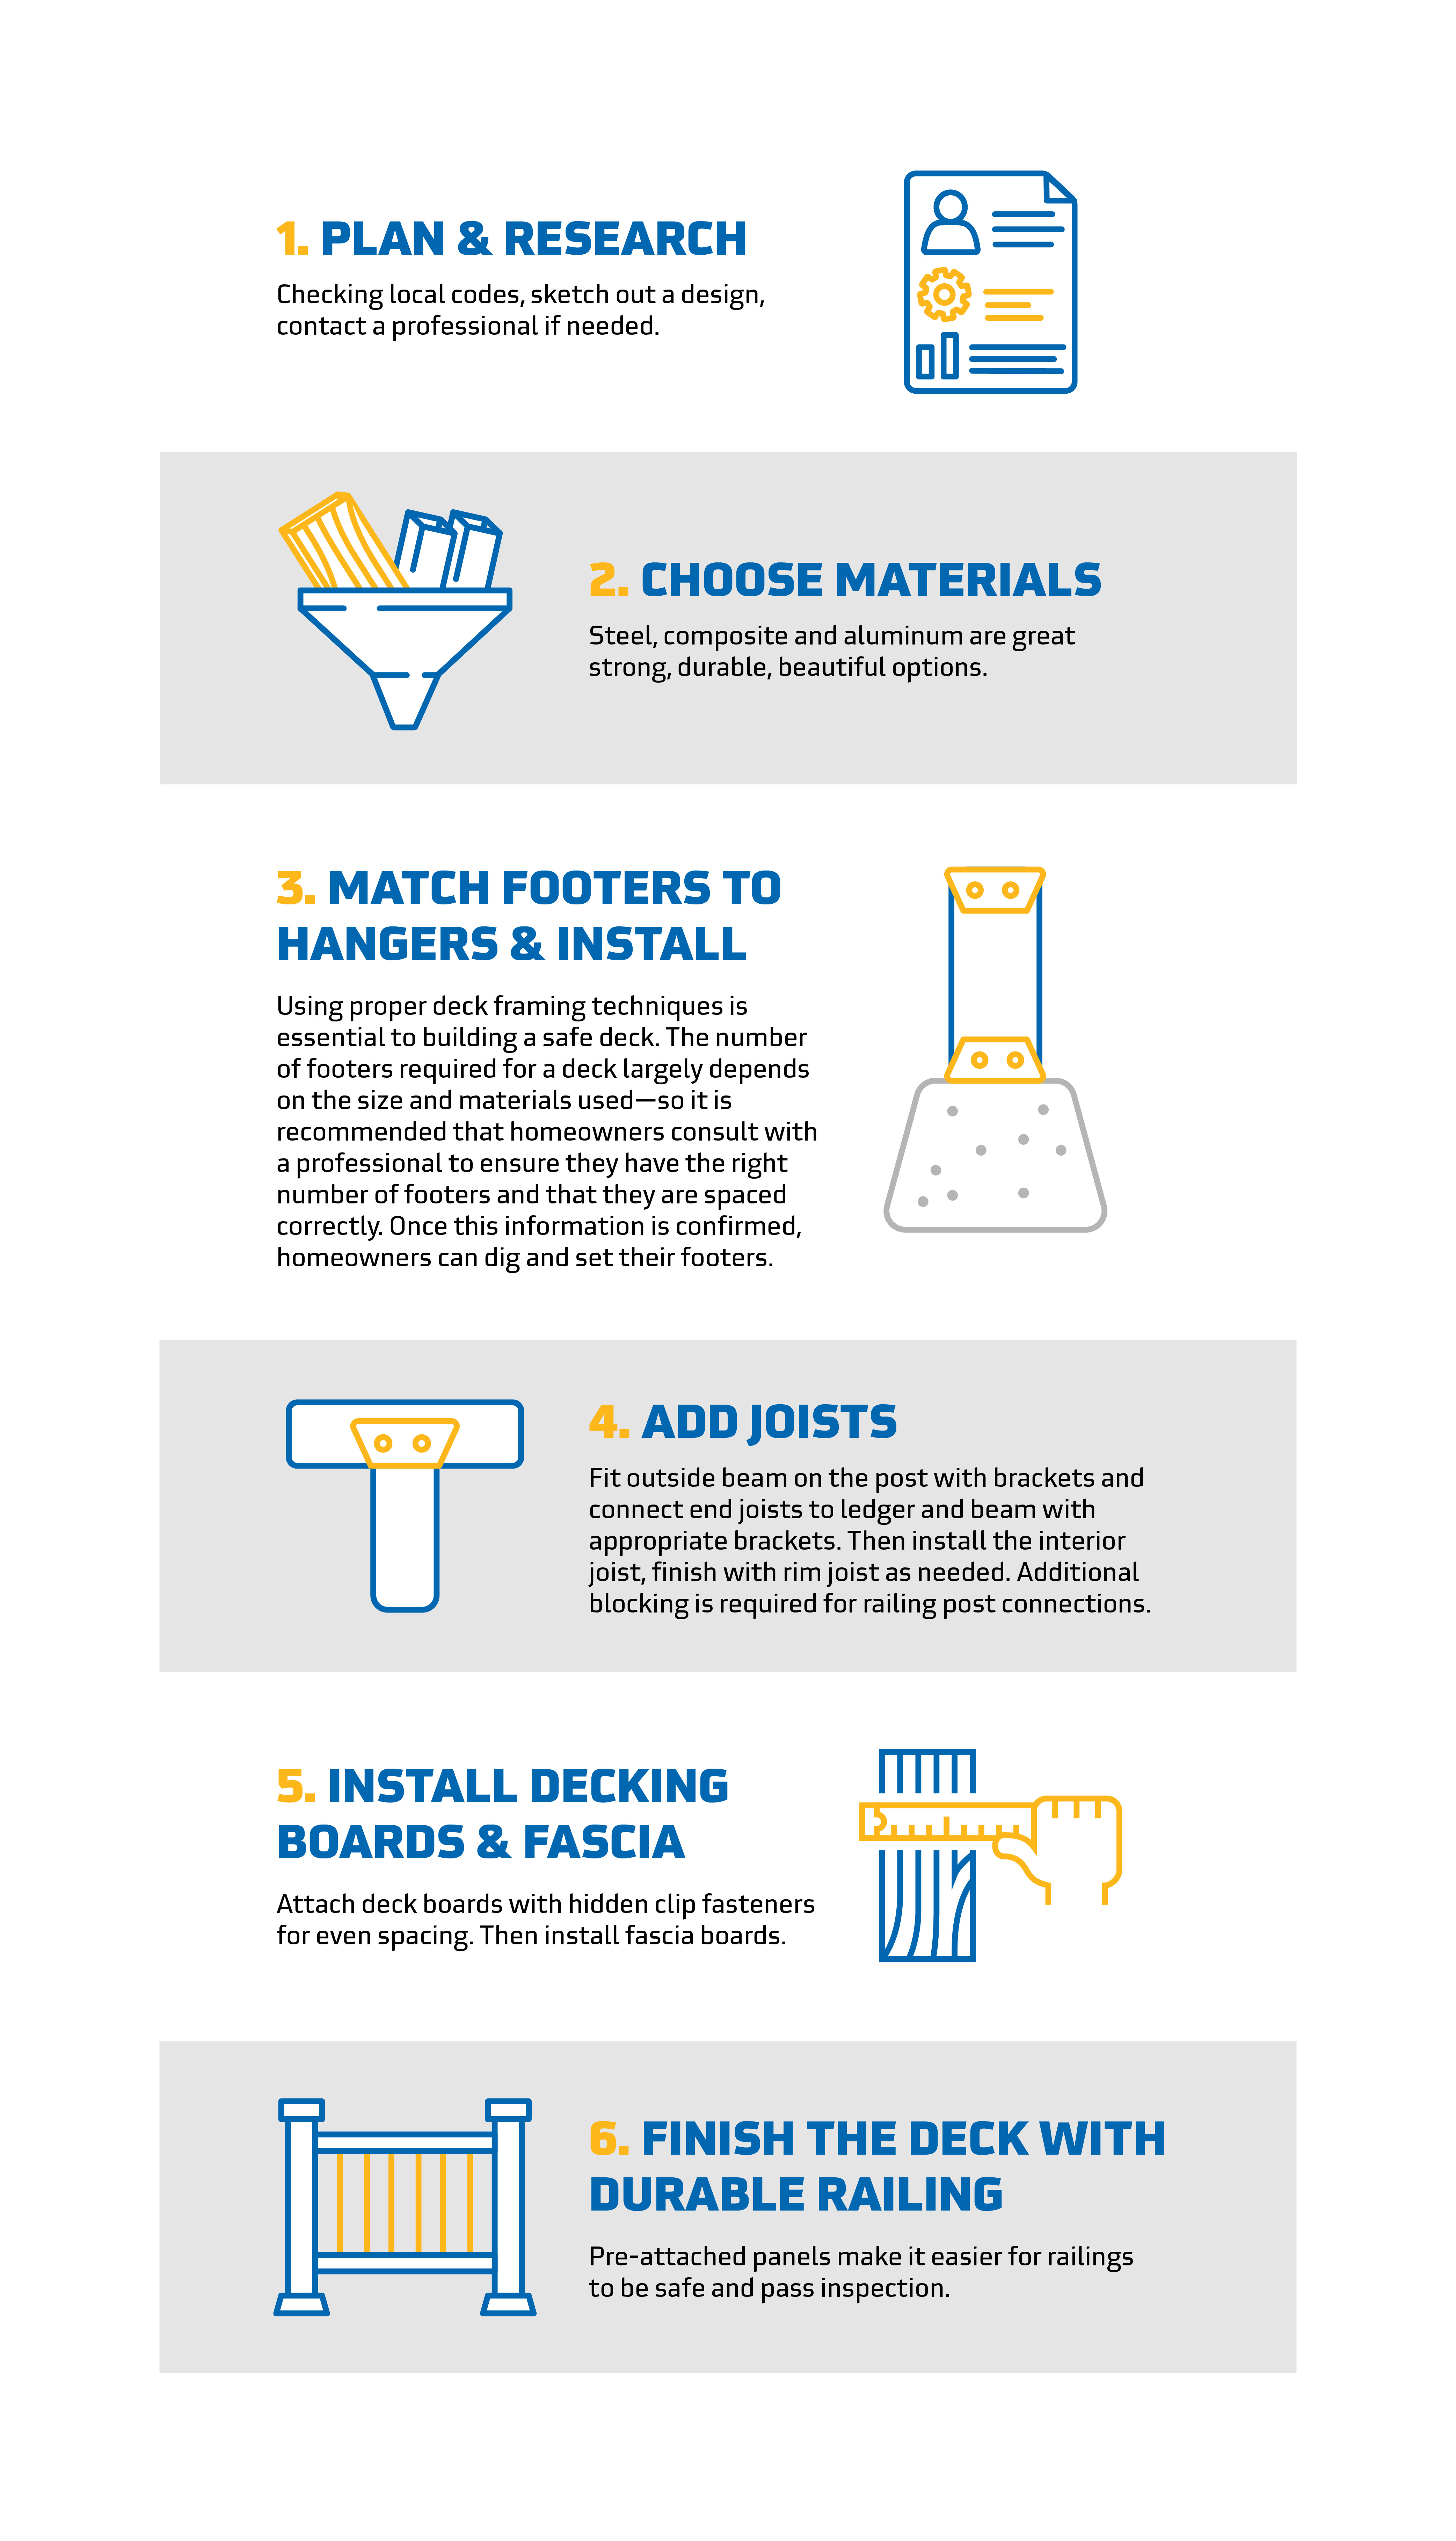 Infographic of 6 steps to ensure a straight forward deck installation process.